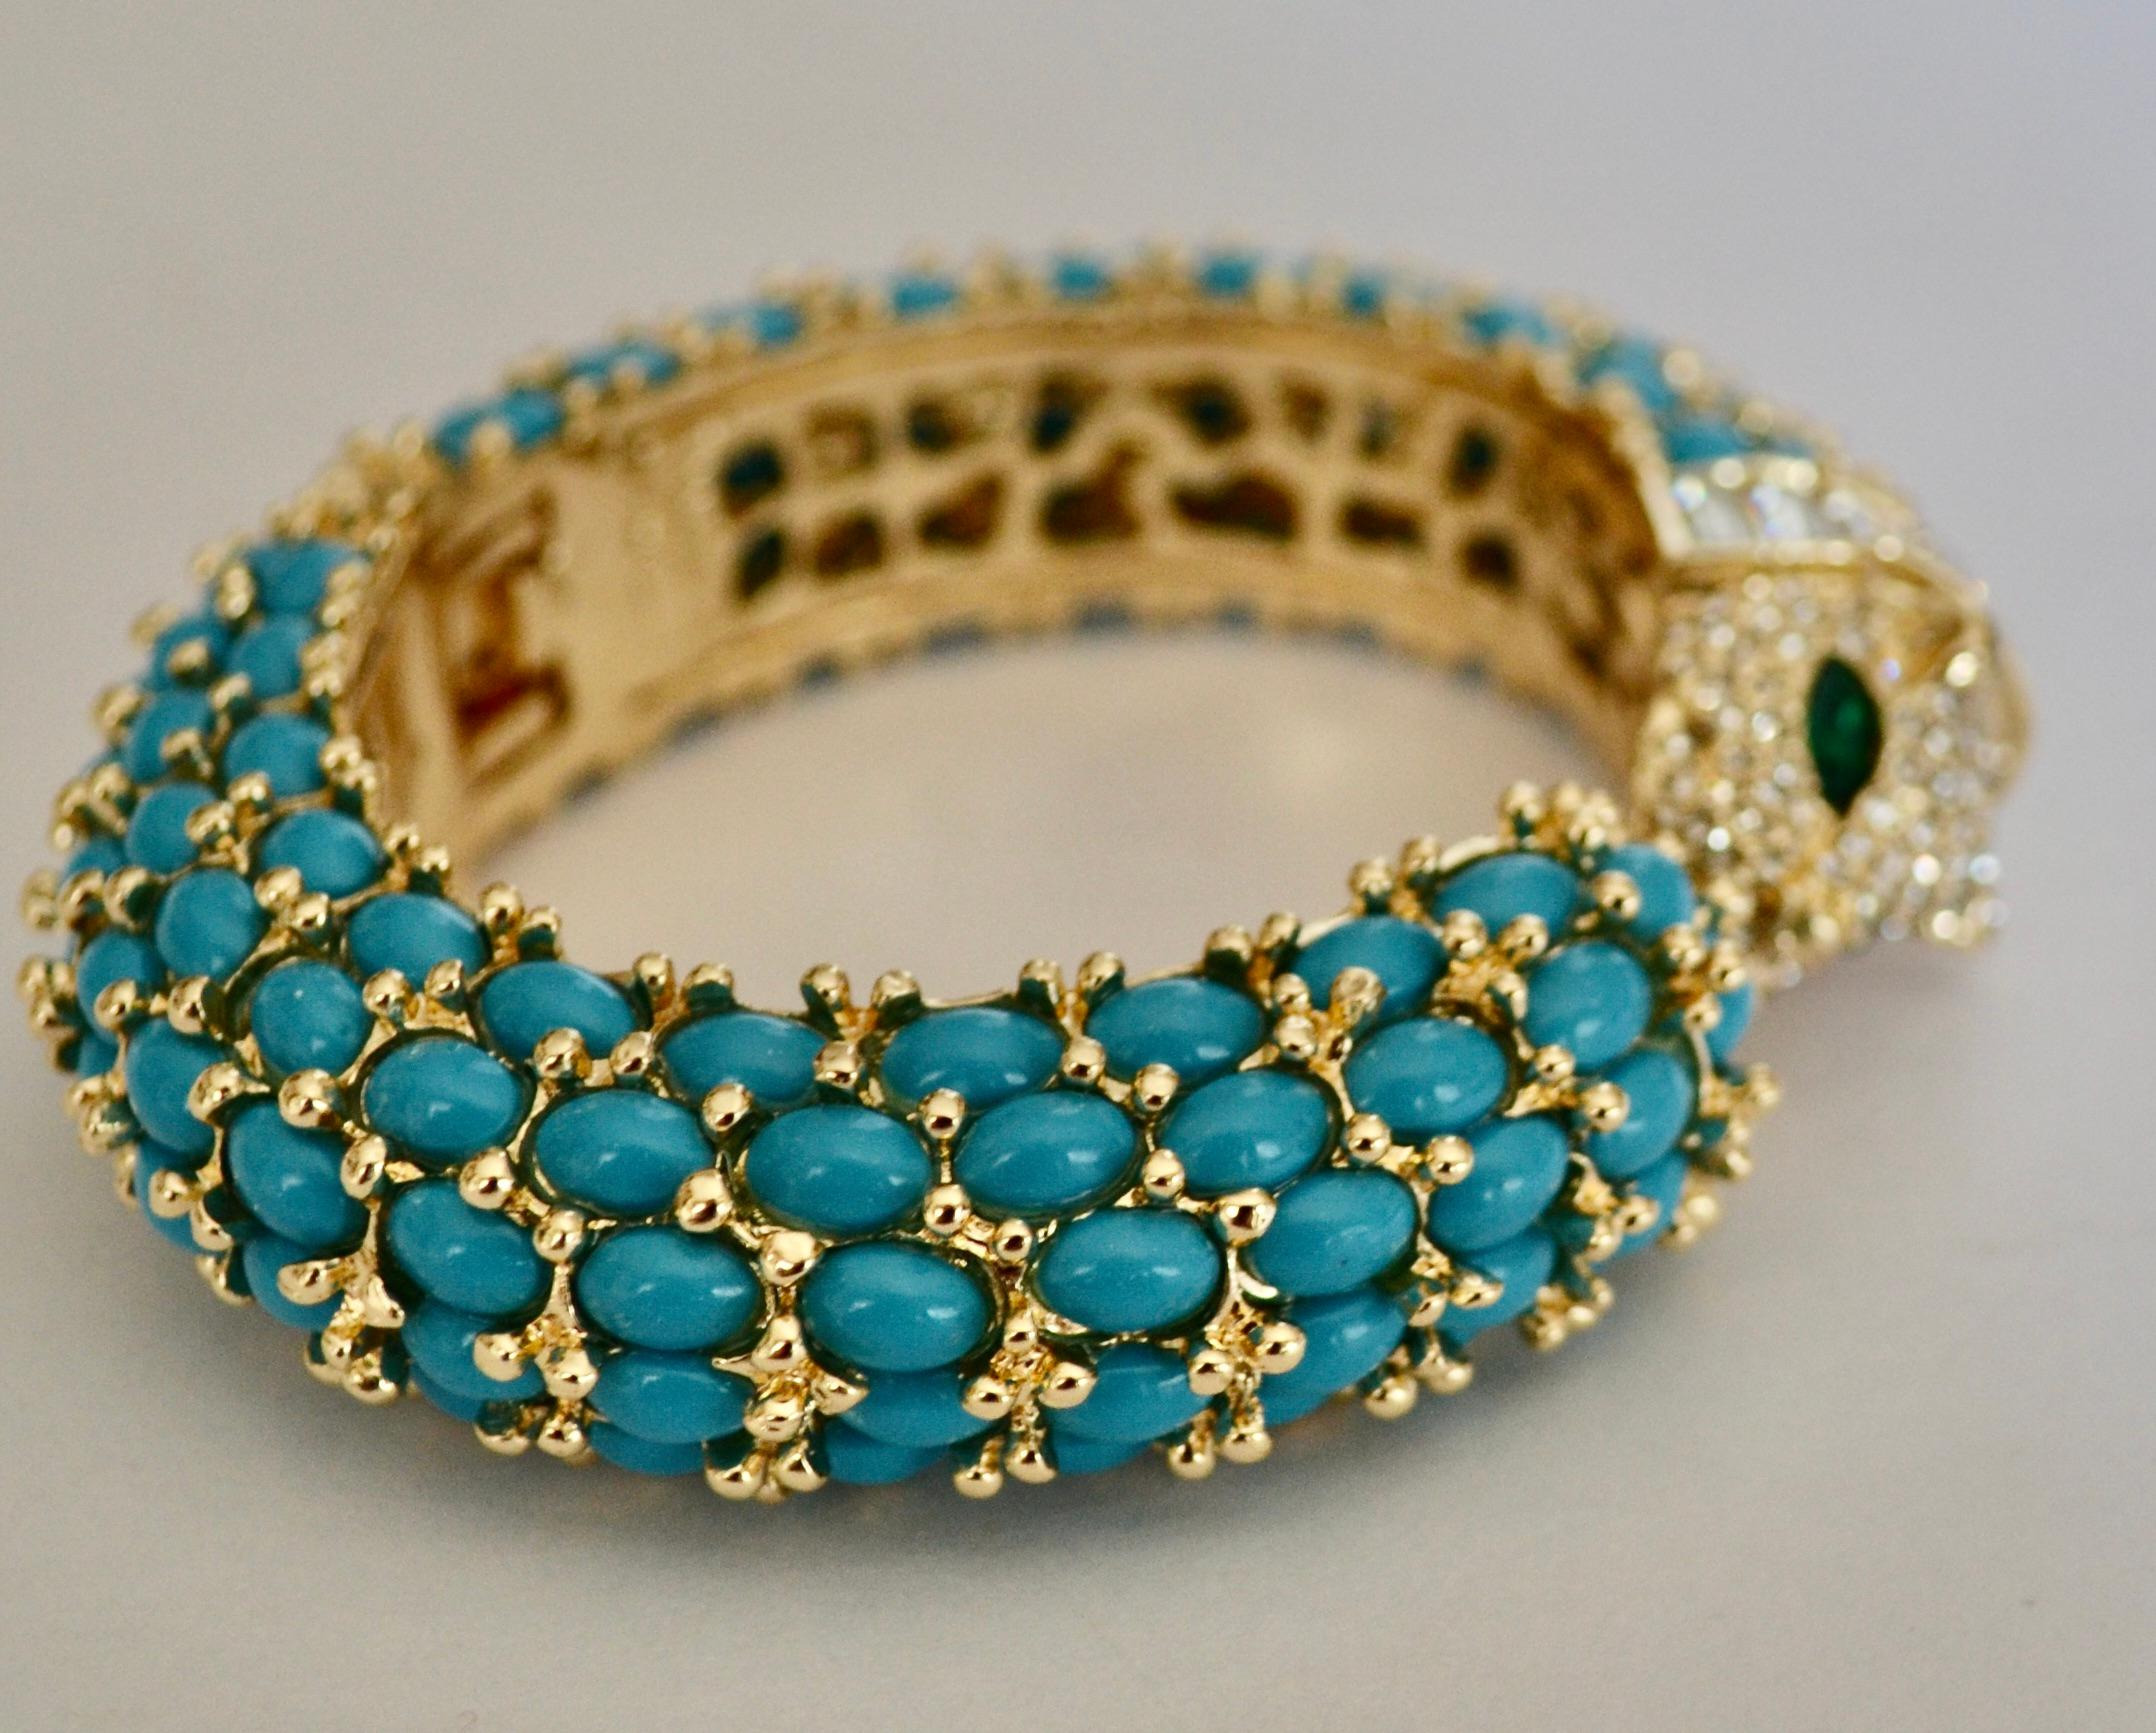 Baroque Turquoise and Crystal Panther Bangle